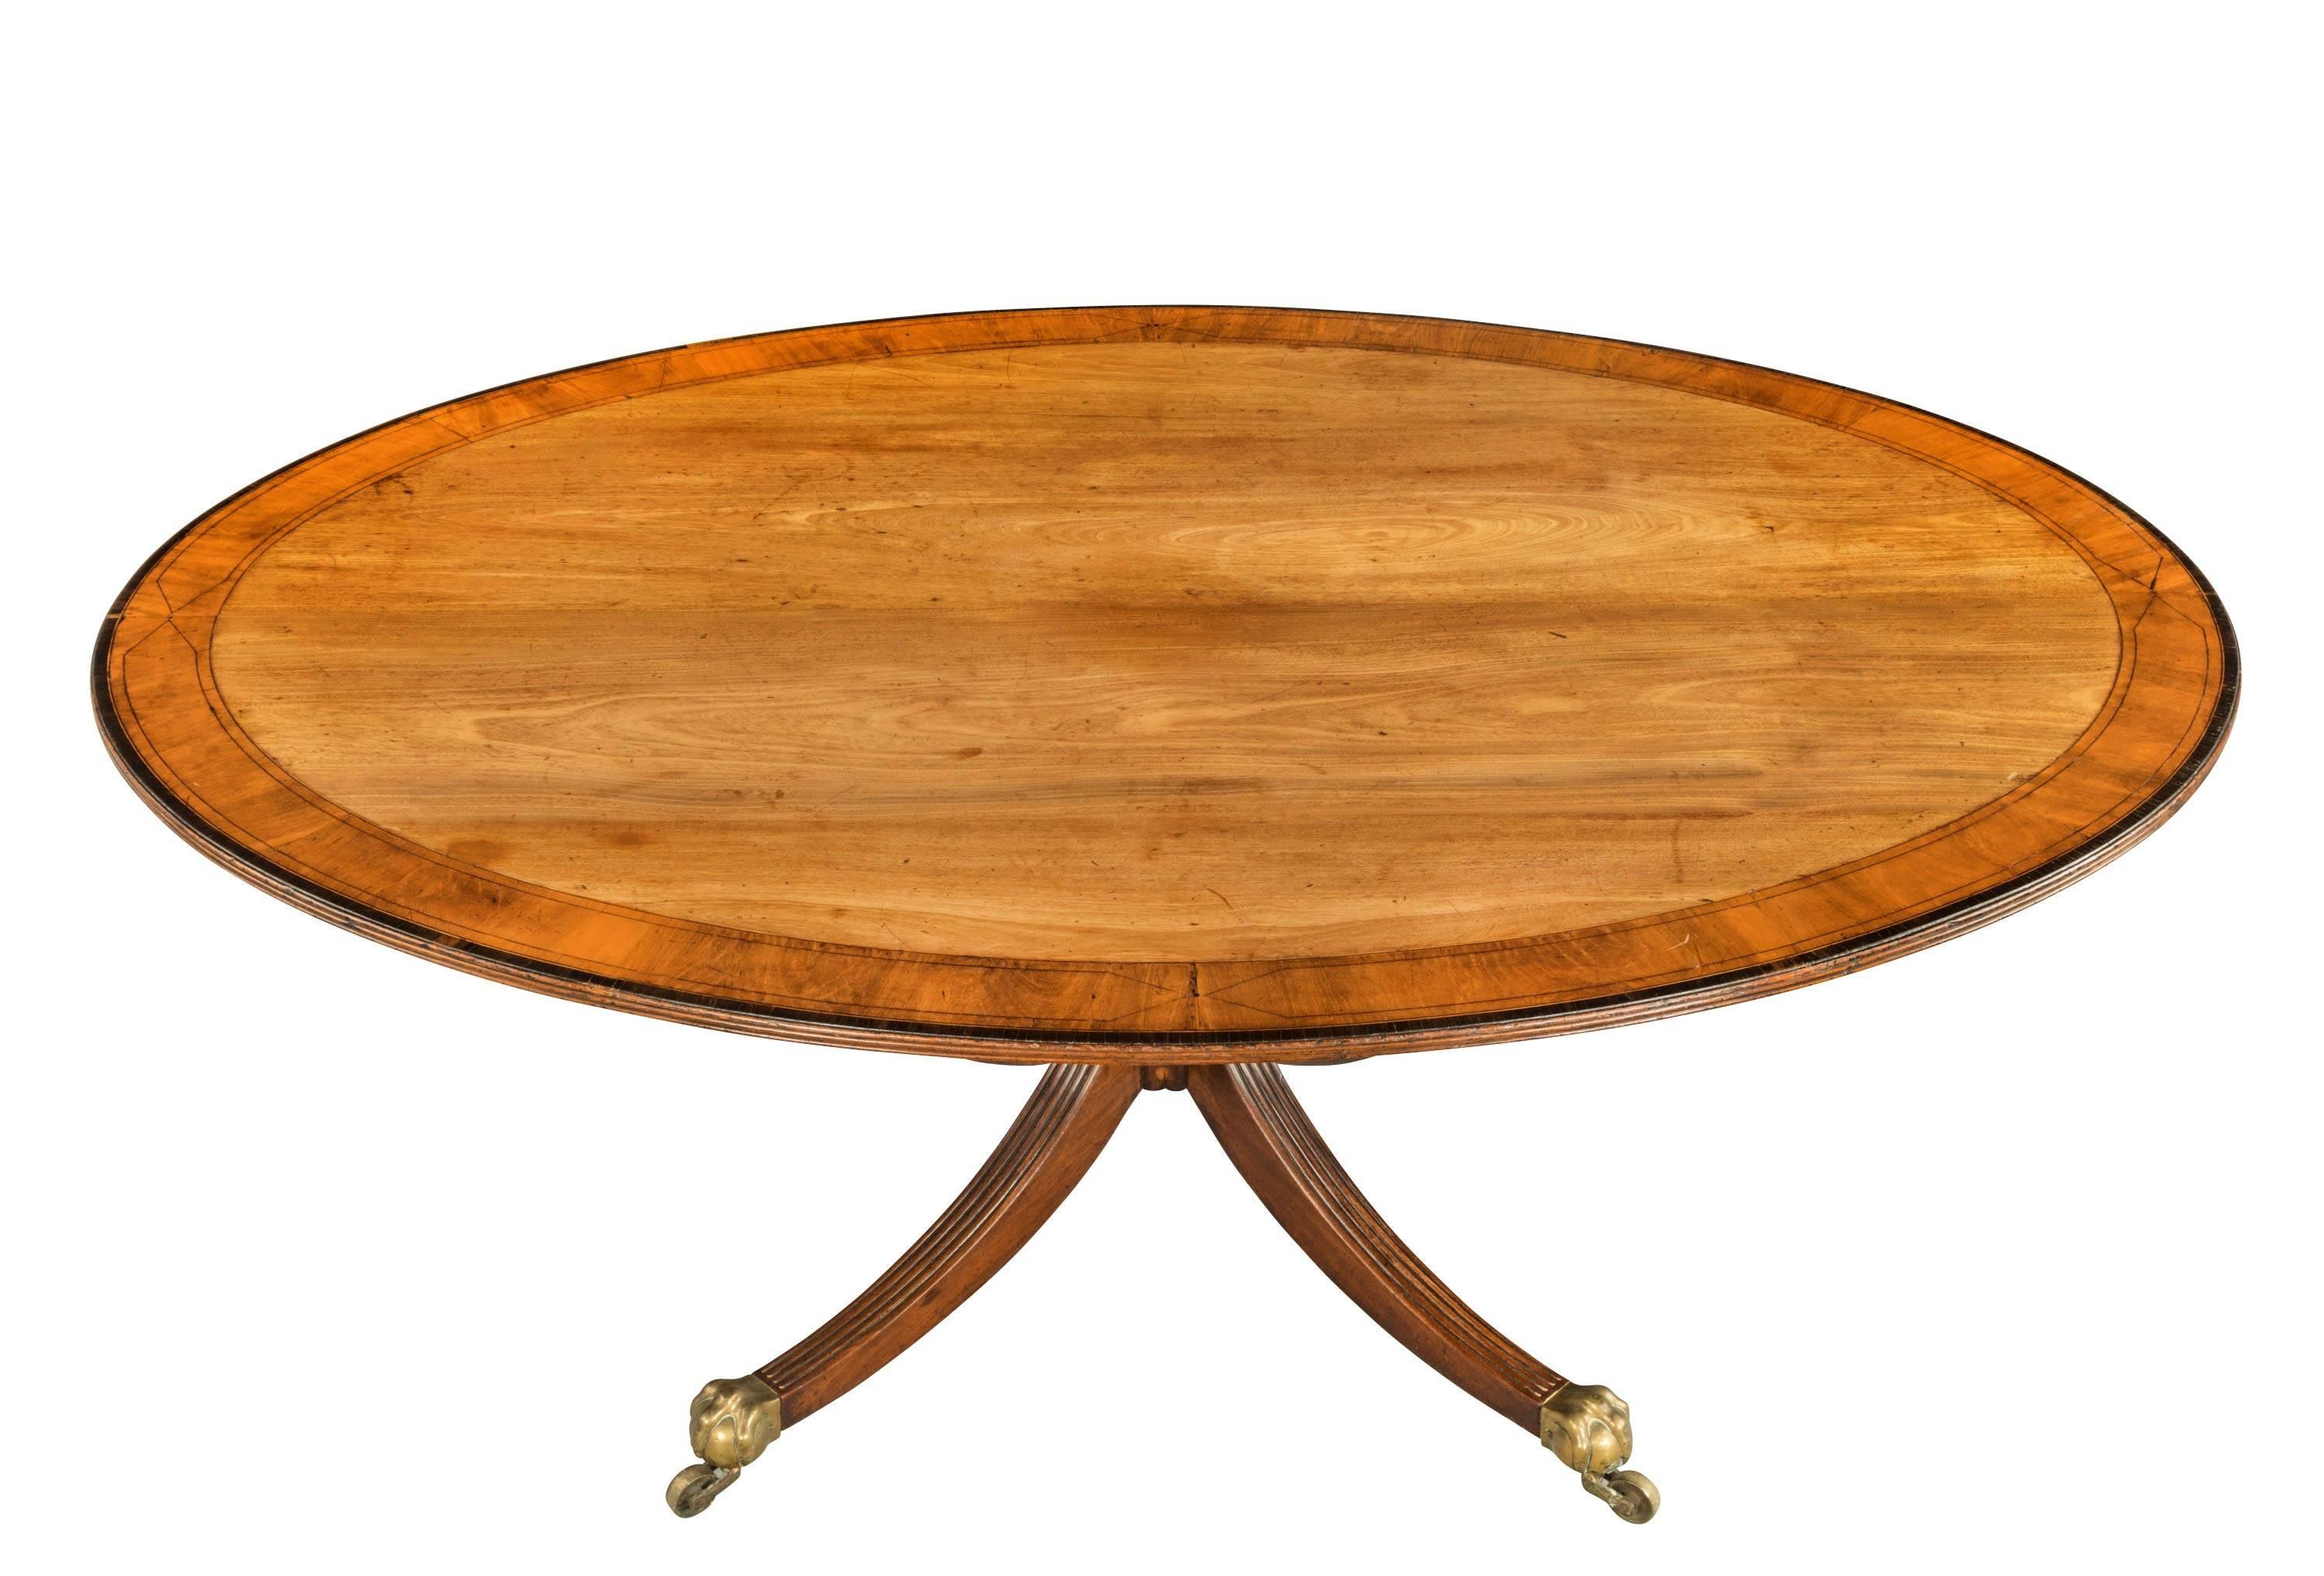 A fine large oval mahogany breakfast table. The beautifully figured top very broadly crossbanded with line inlay. Turned central support. 1790 design but actually 1910.